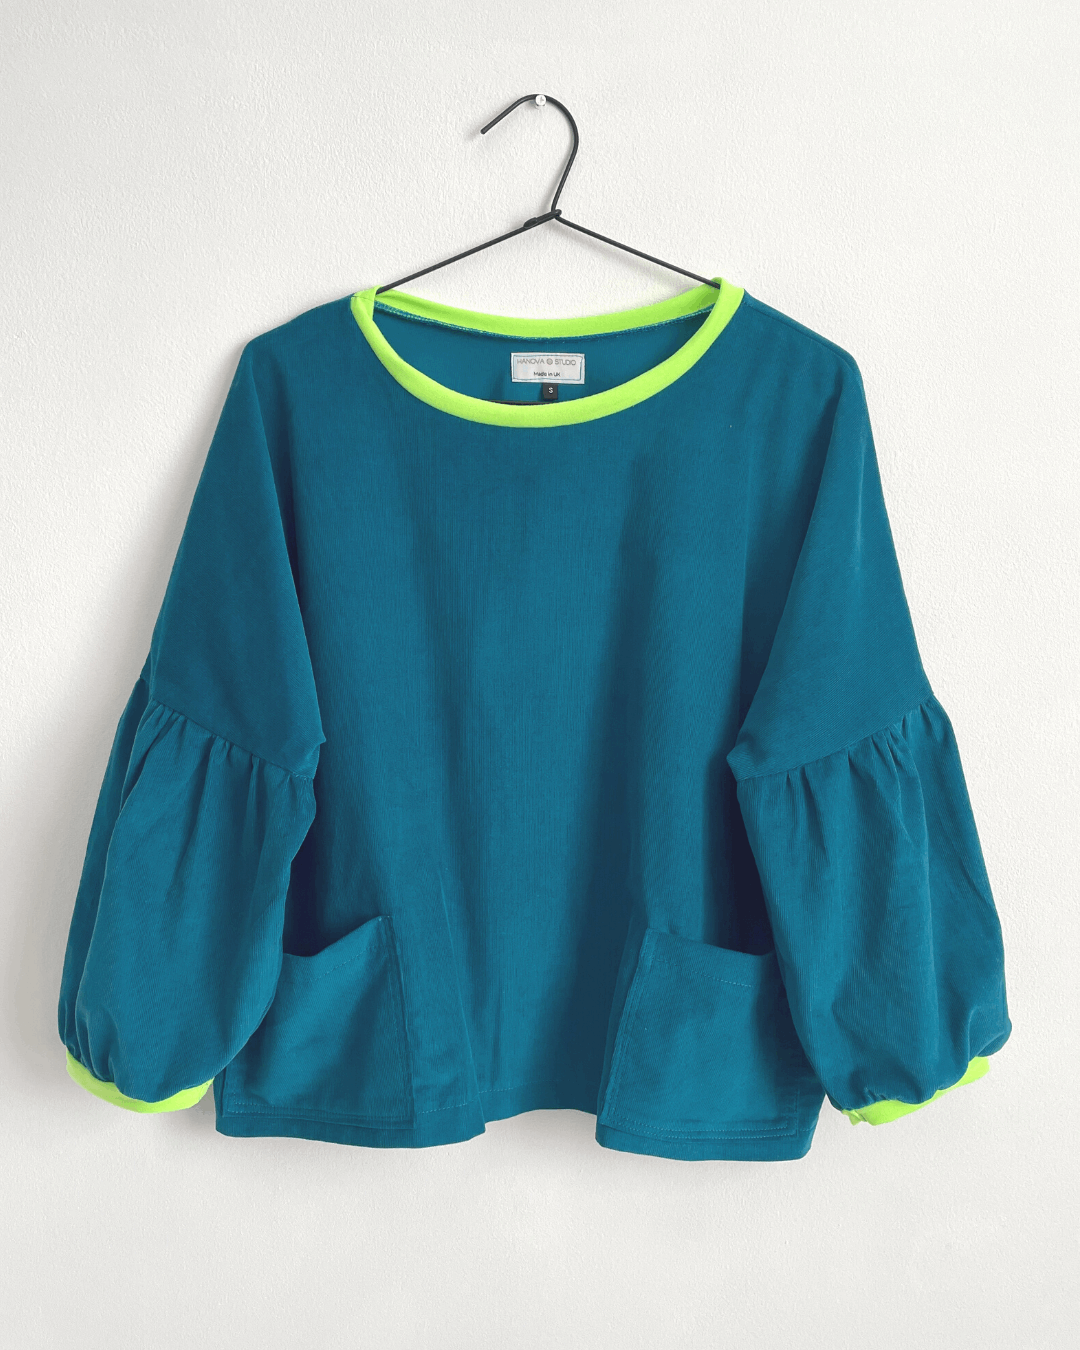 teal cord cloud blouse with neon trim on a hanger